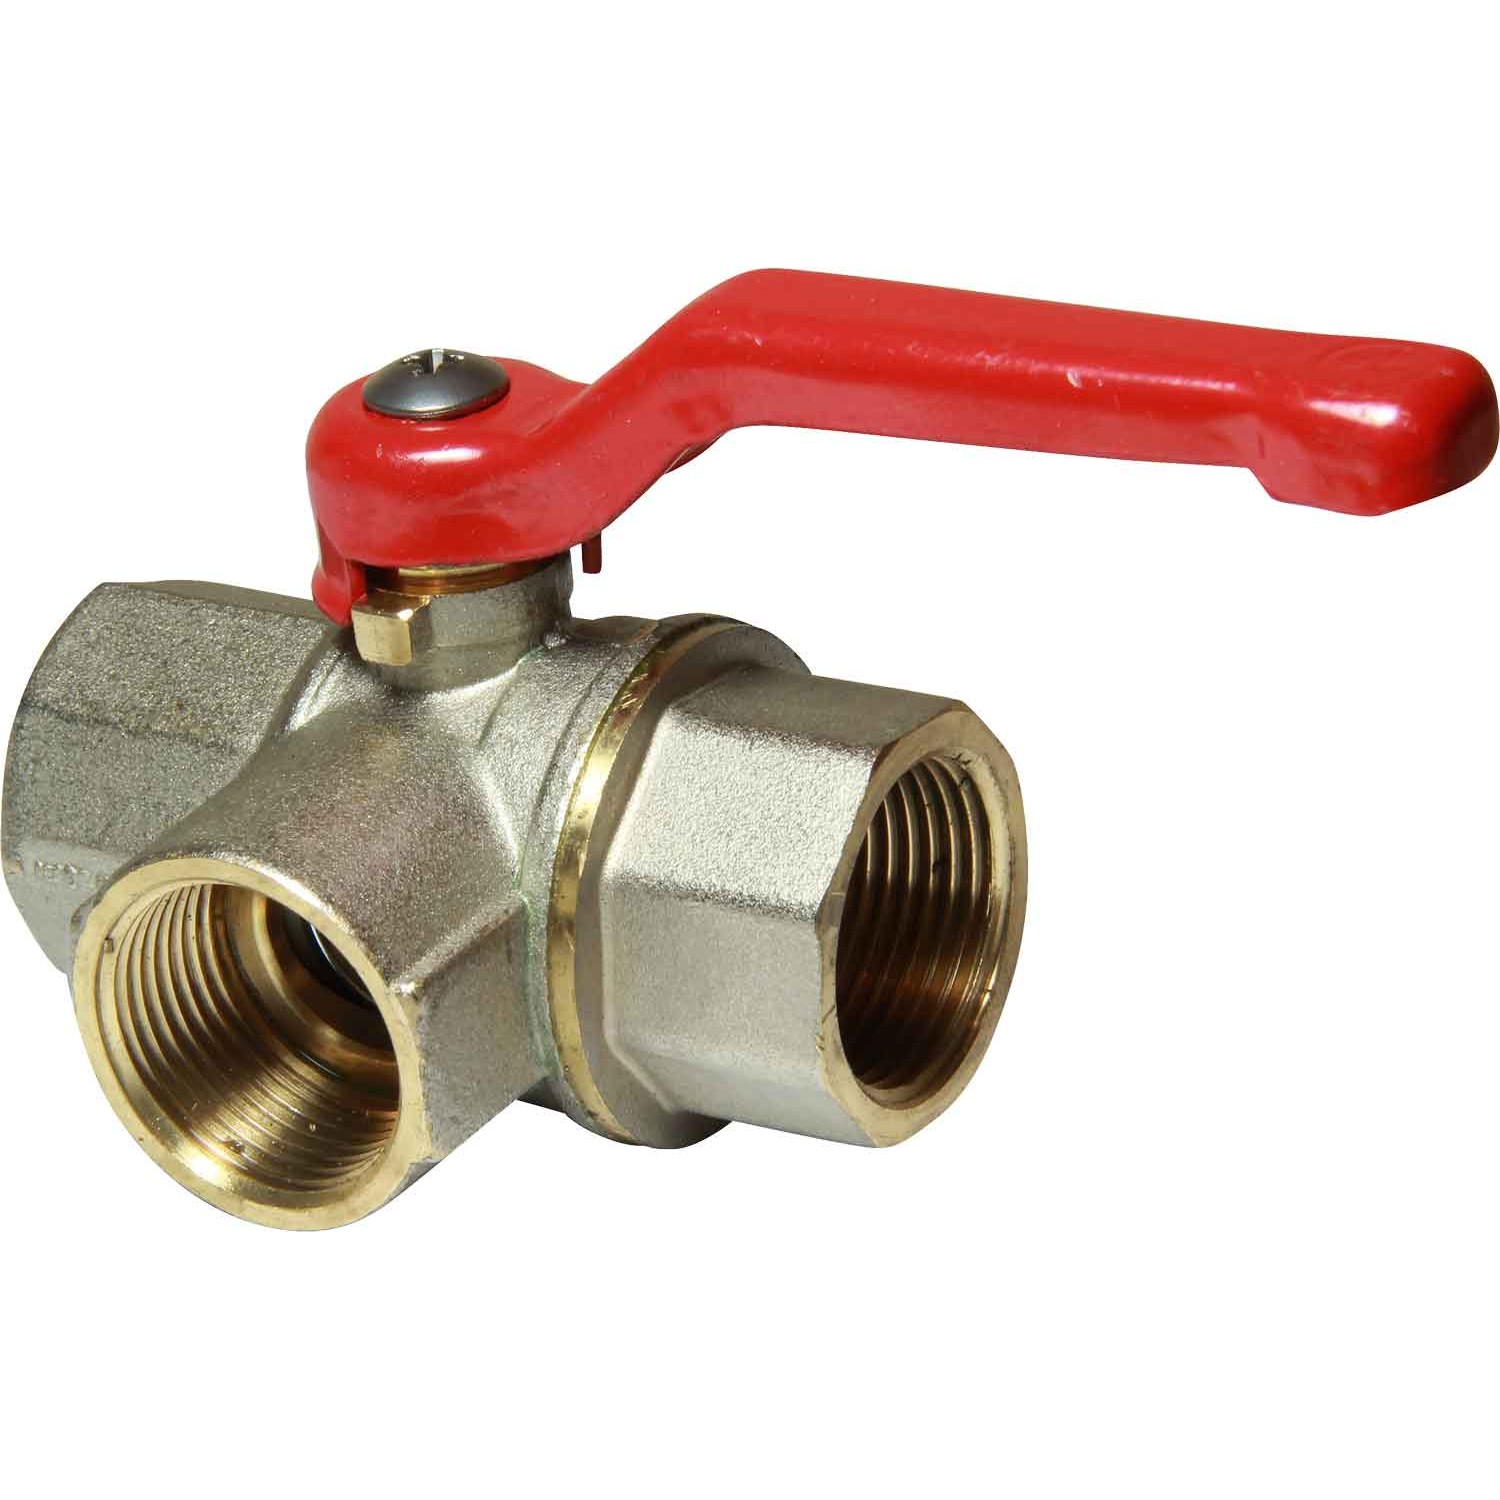 Everflow Supplies 600T014-NL Lead Free Full Port Forged Brass Ball Valve with Female Threaded IPS Connections 1/4 